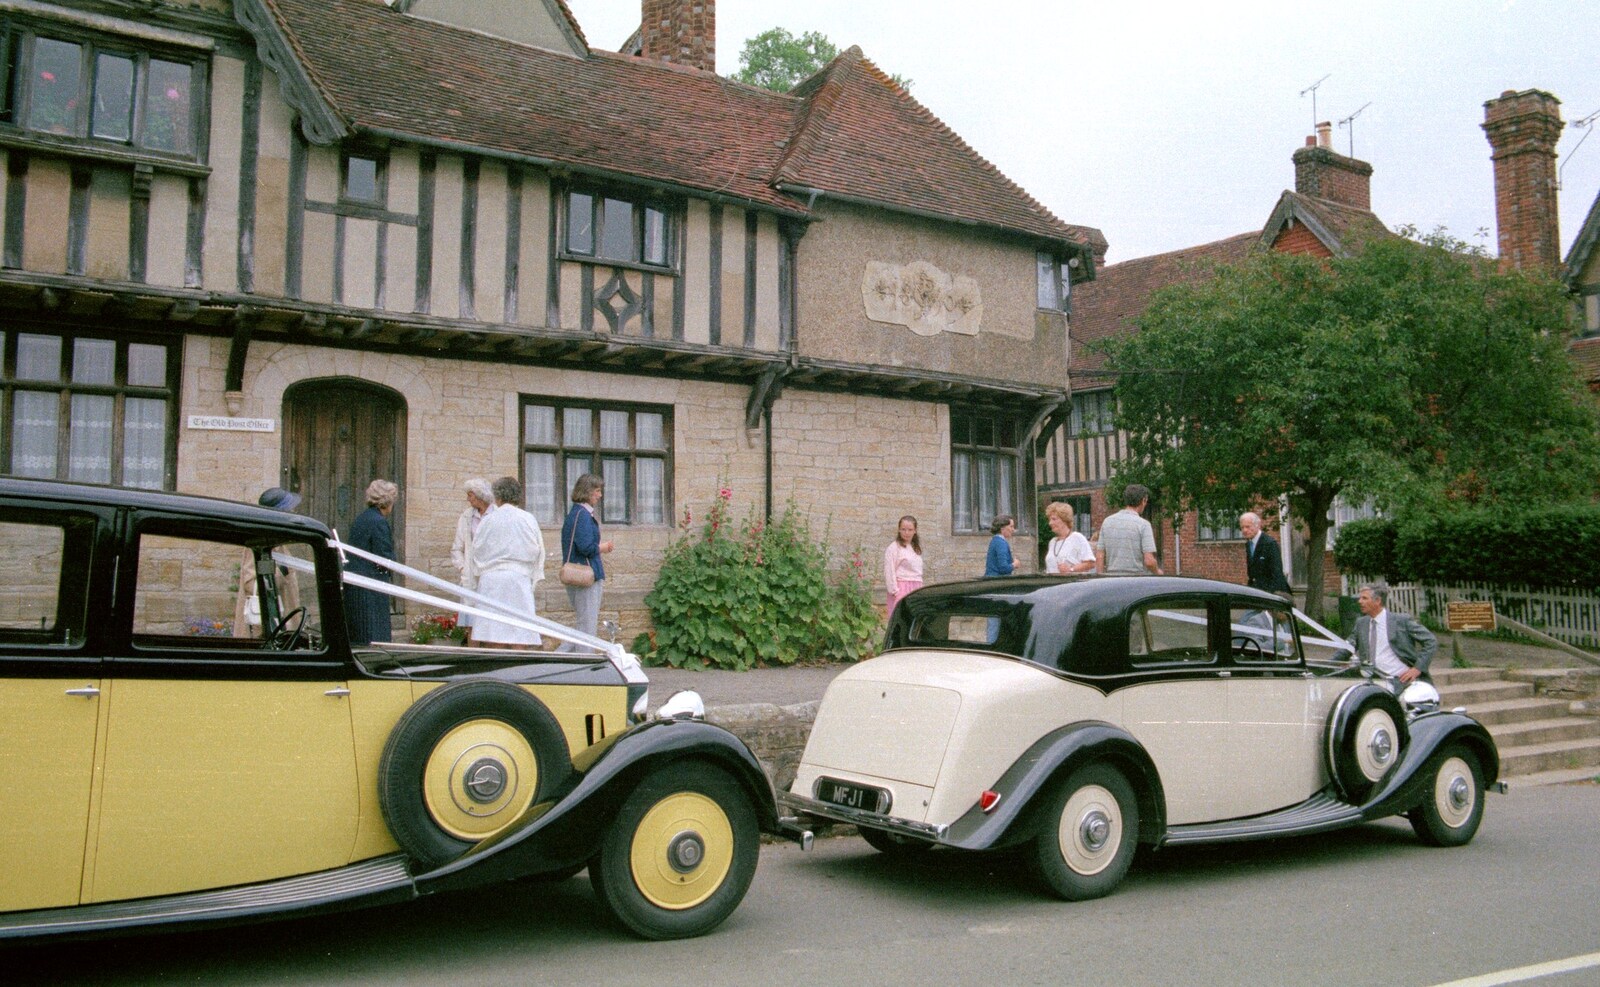 A couple of nice old wedding cars from A Trip to Groombridge, Kent - 10th July 1986